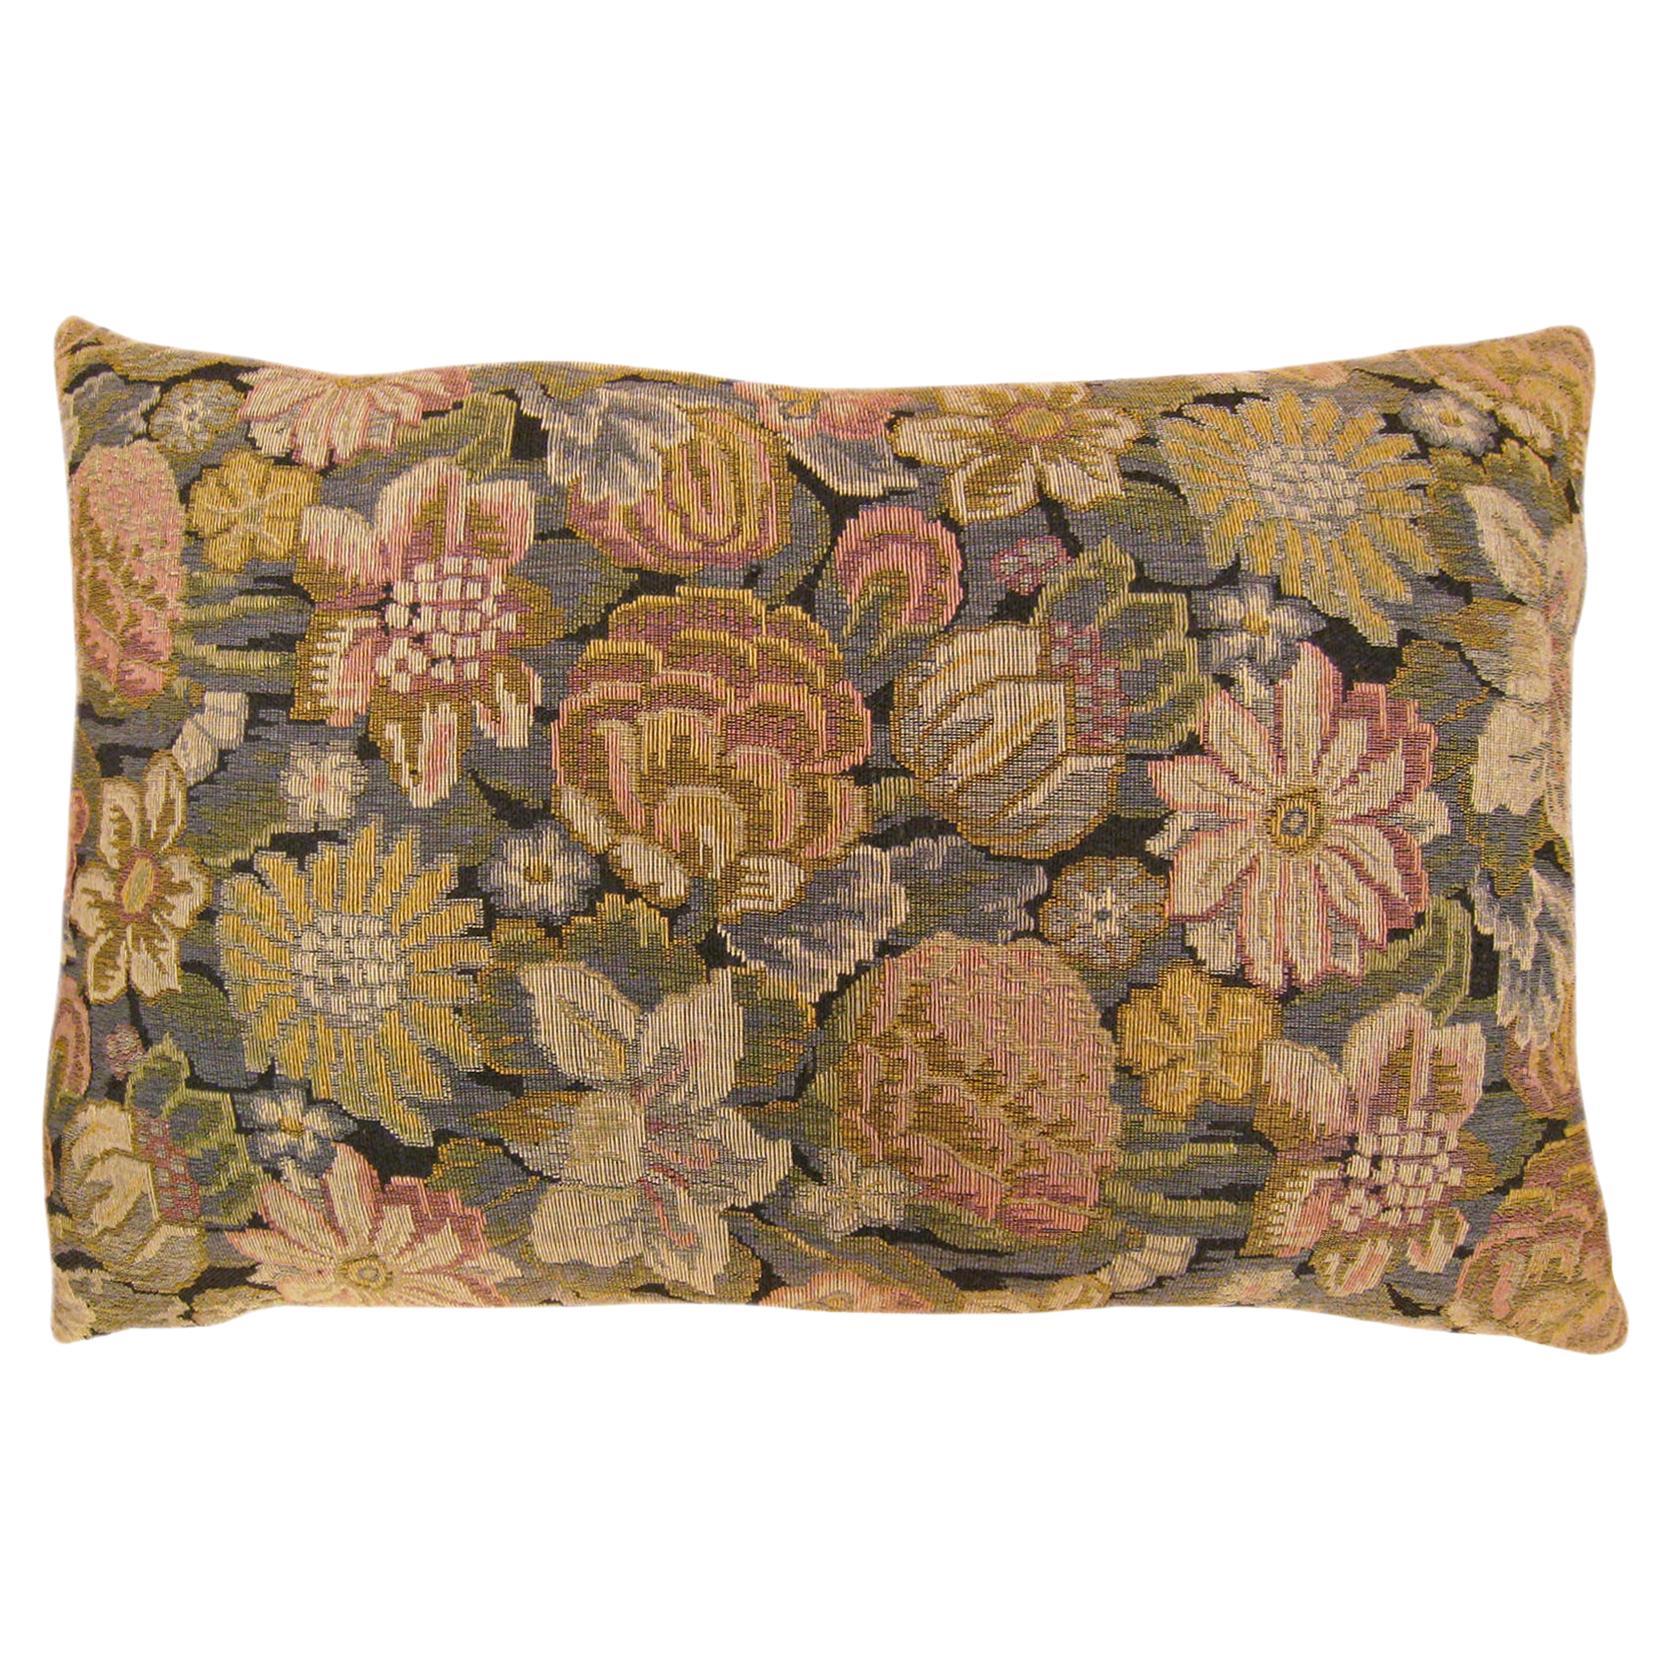 Decorative Antique Jacquard Tapestry Pillow with Floral Elements Allover For Sale